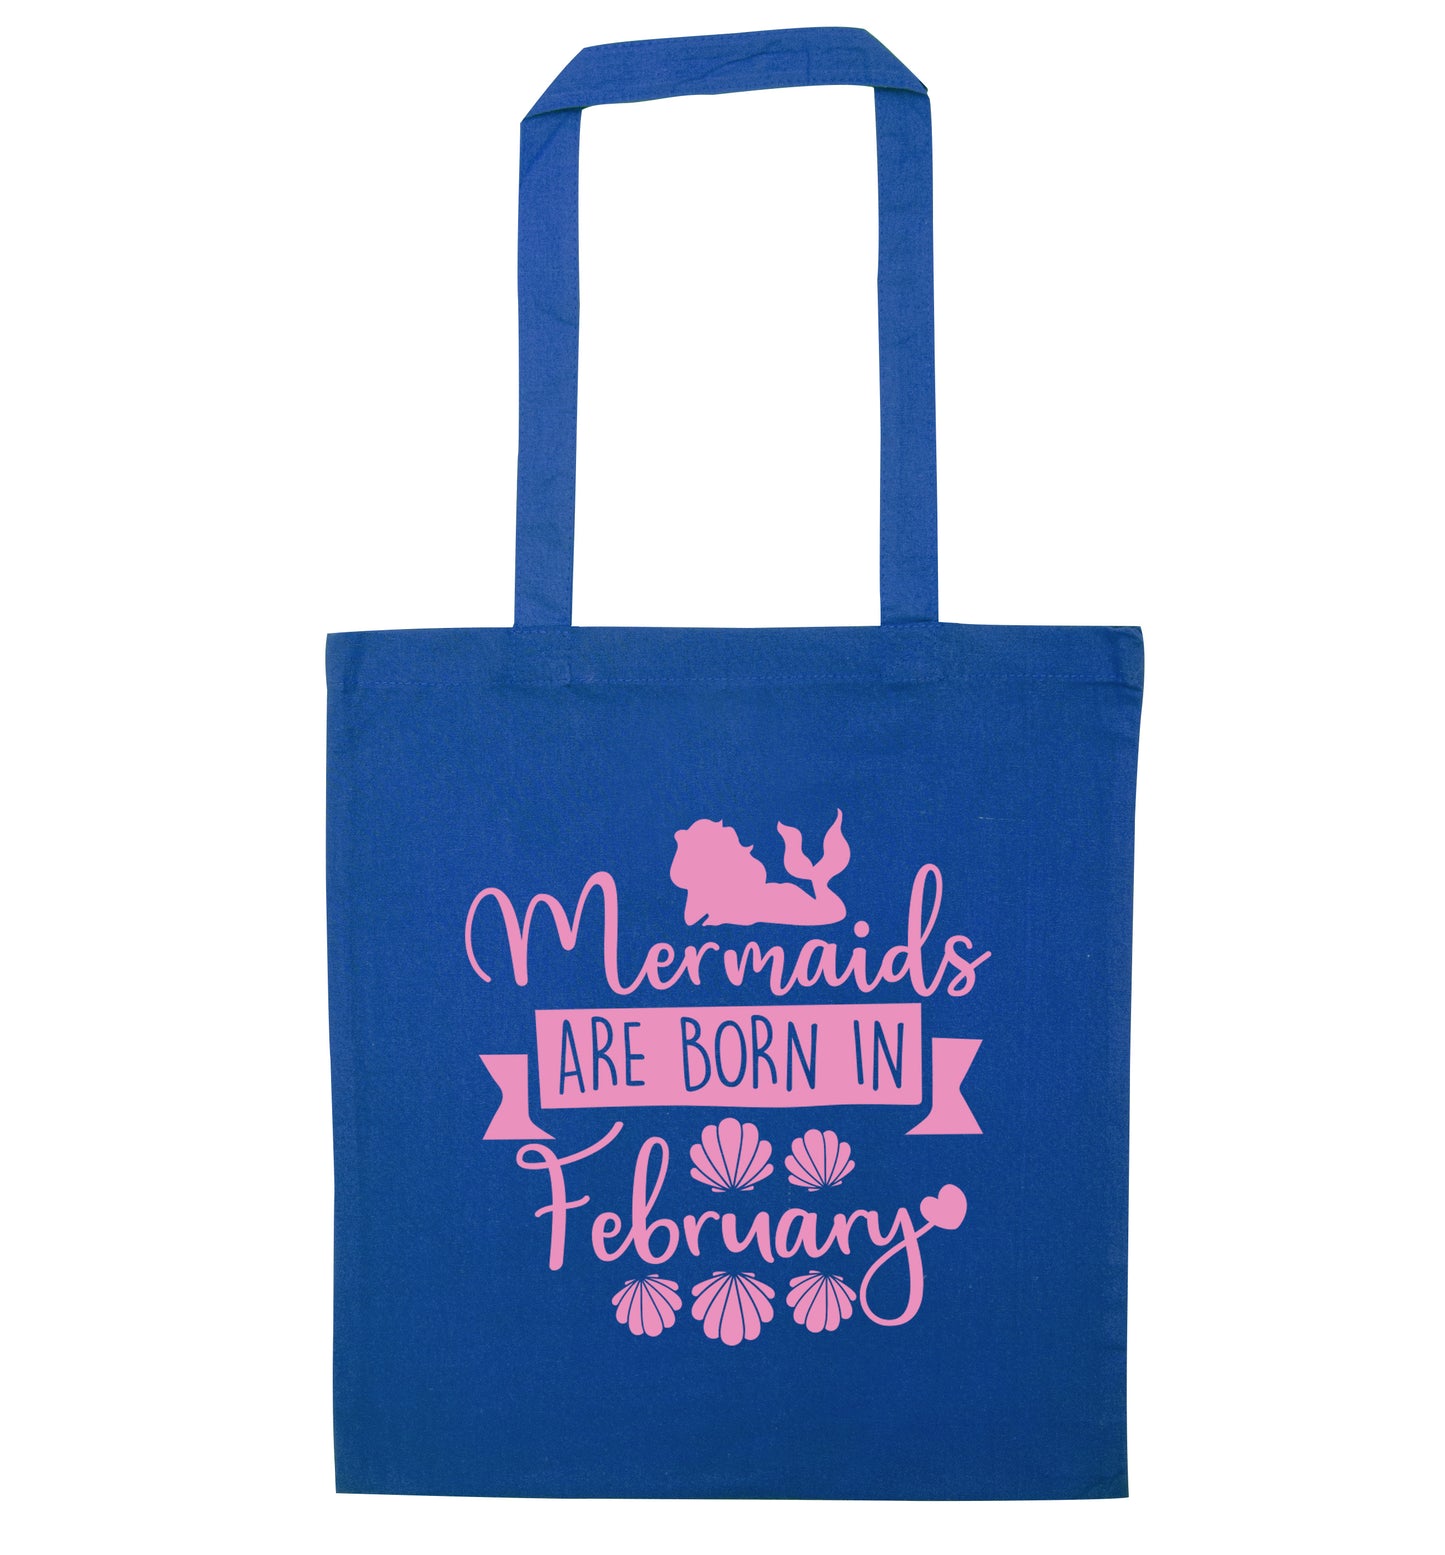 Mermaids are born in February blue tote bag